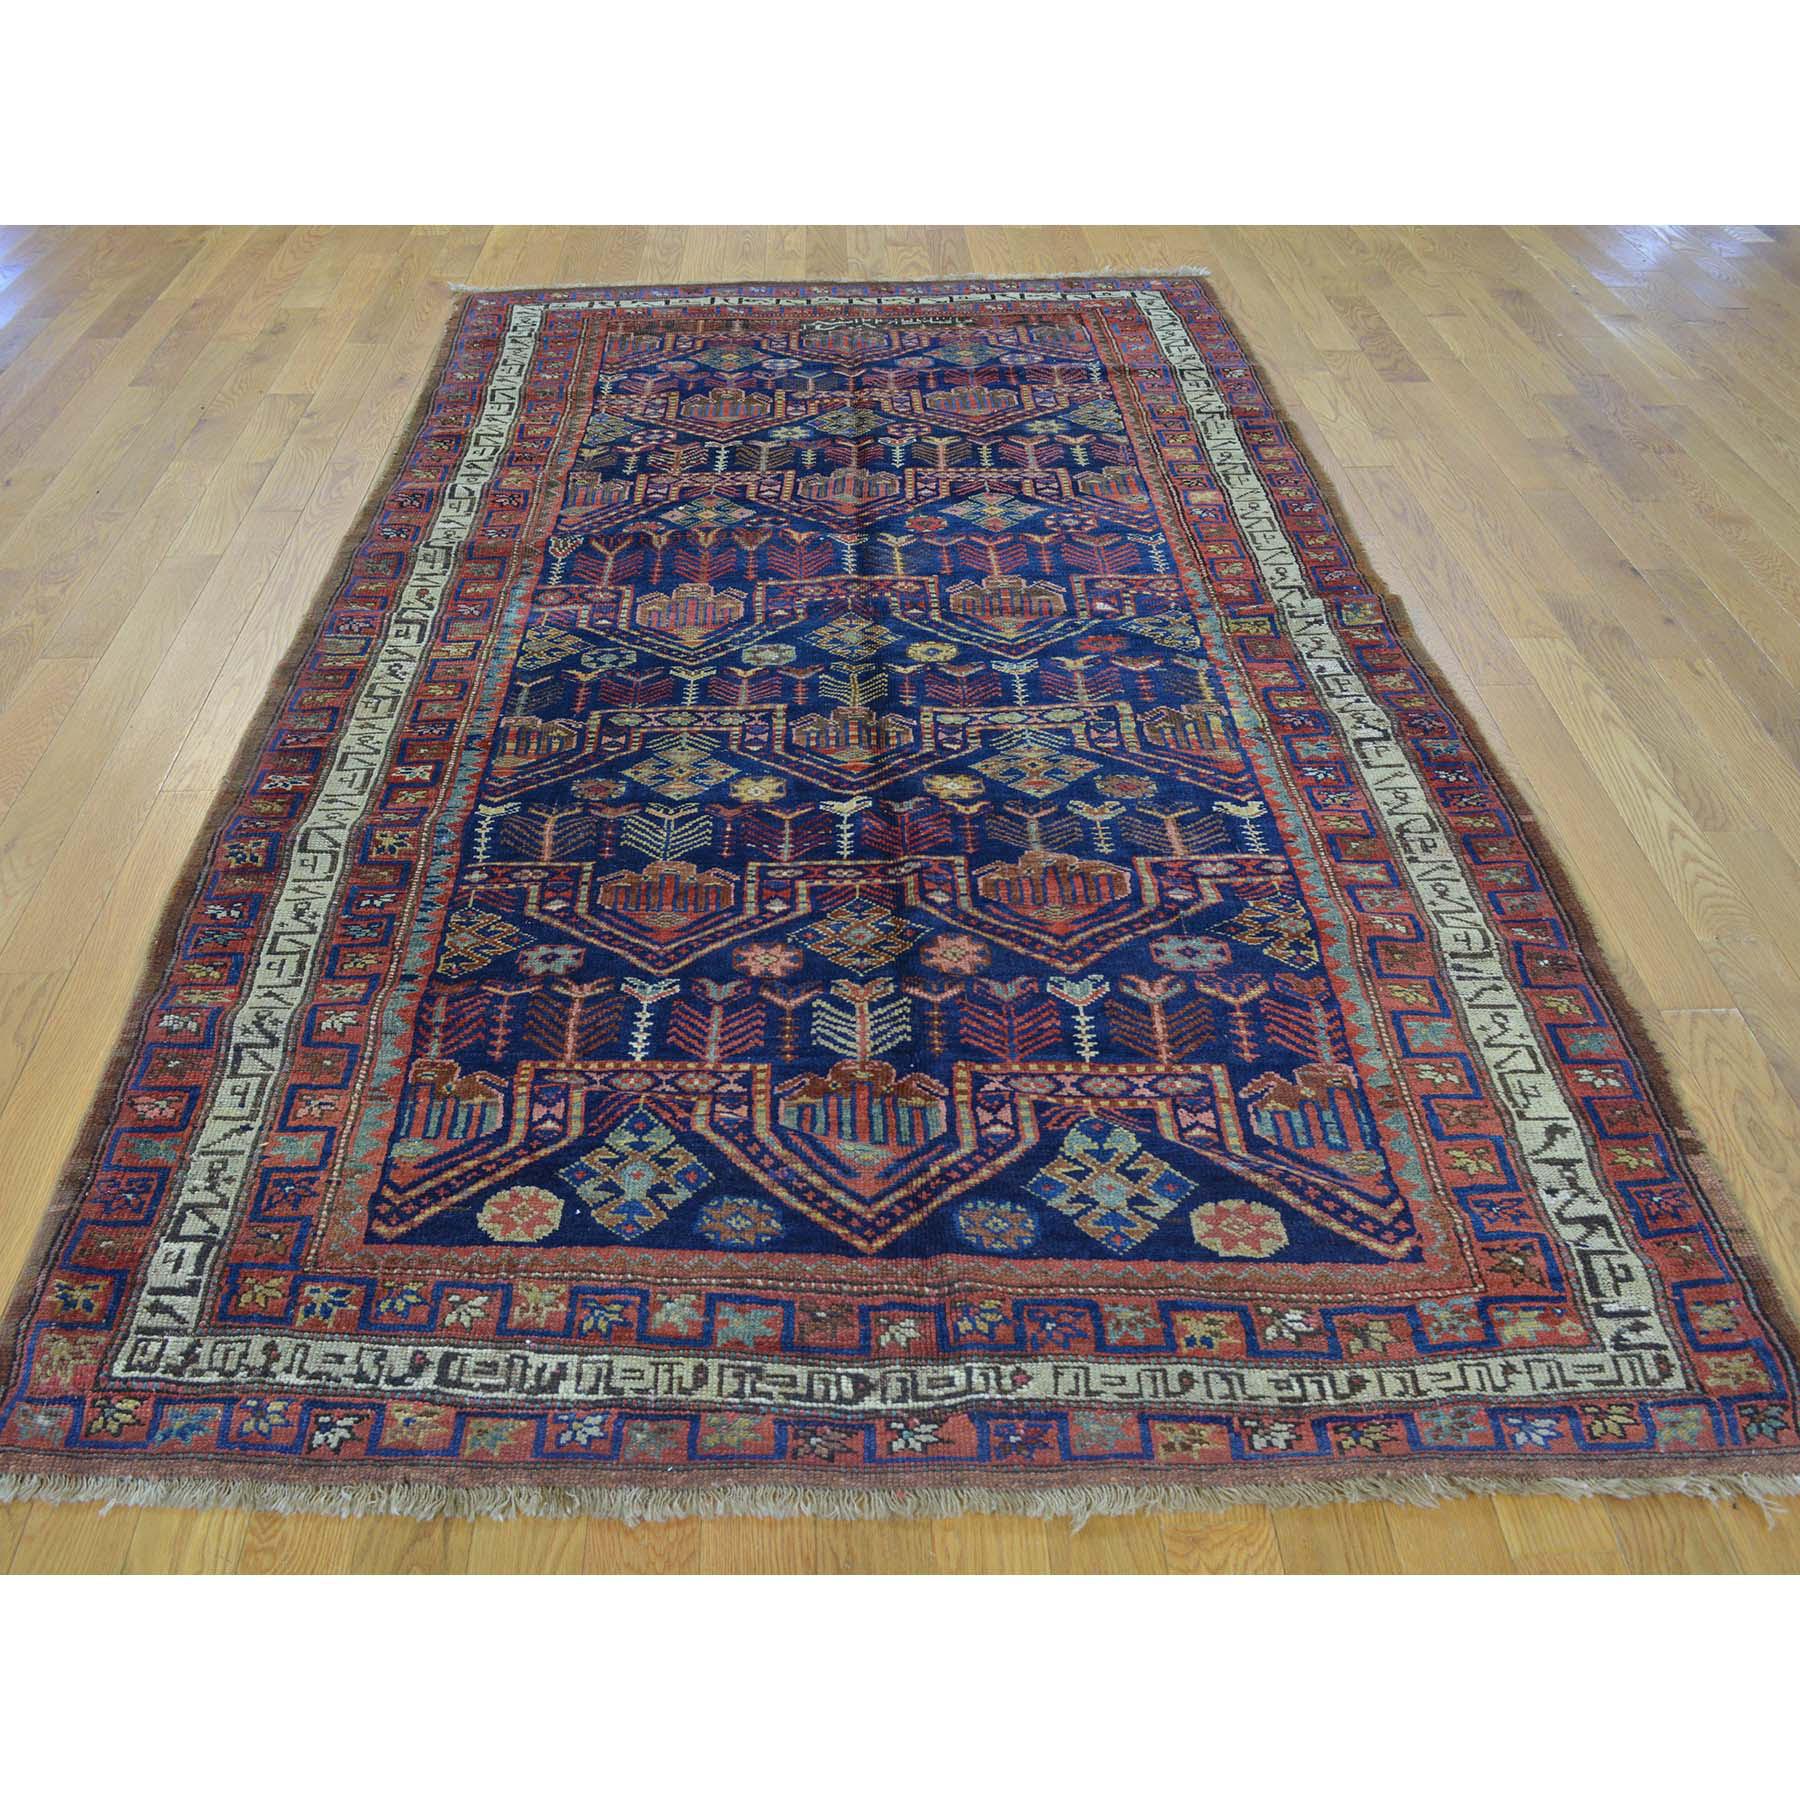 Antique Persian Kurdish Bijar Exc Cond hand knotted wide runner rug. Measures: 4'9